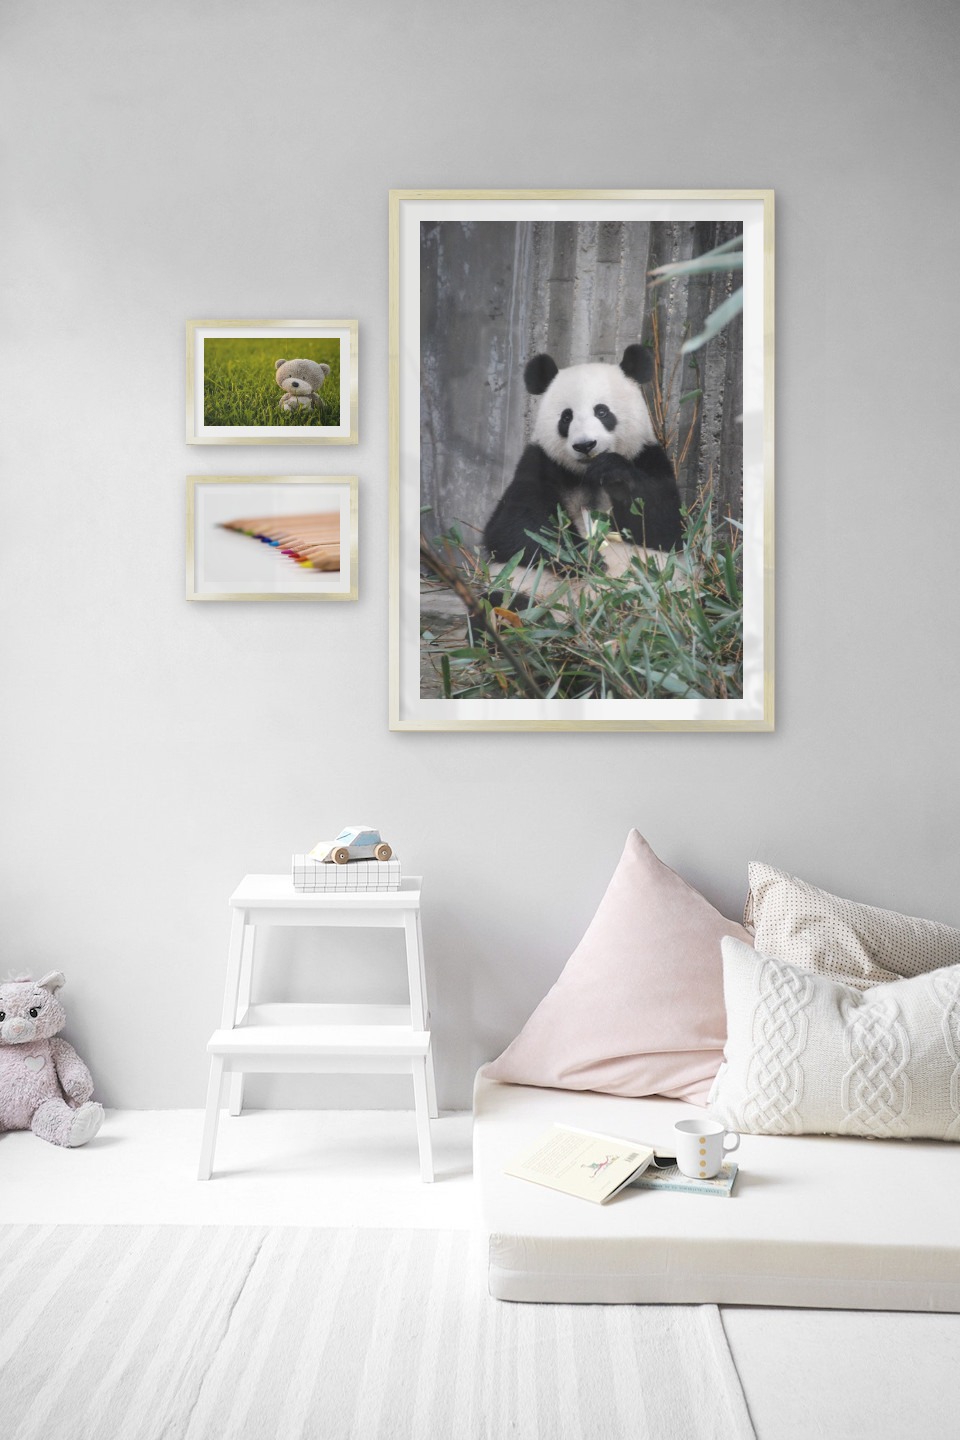 Gallery wall with picture frames in gold in sizes 21x30 and 70x100 with prints "Teddy bear in a field", "Pencils in different colors" and "Panda"